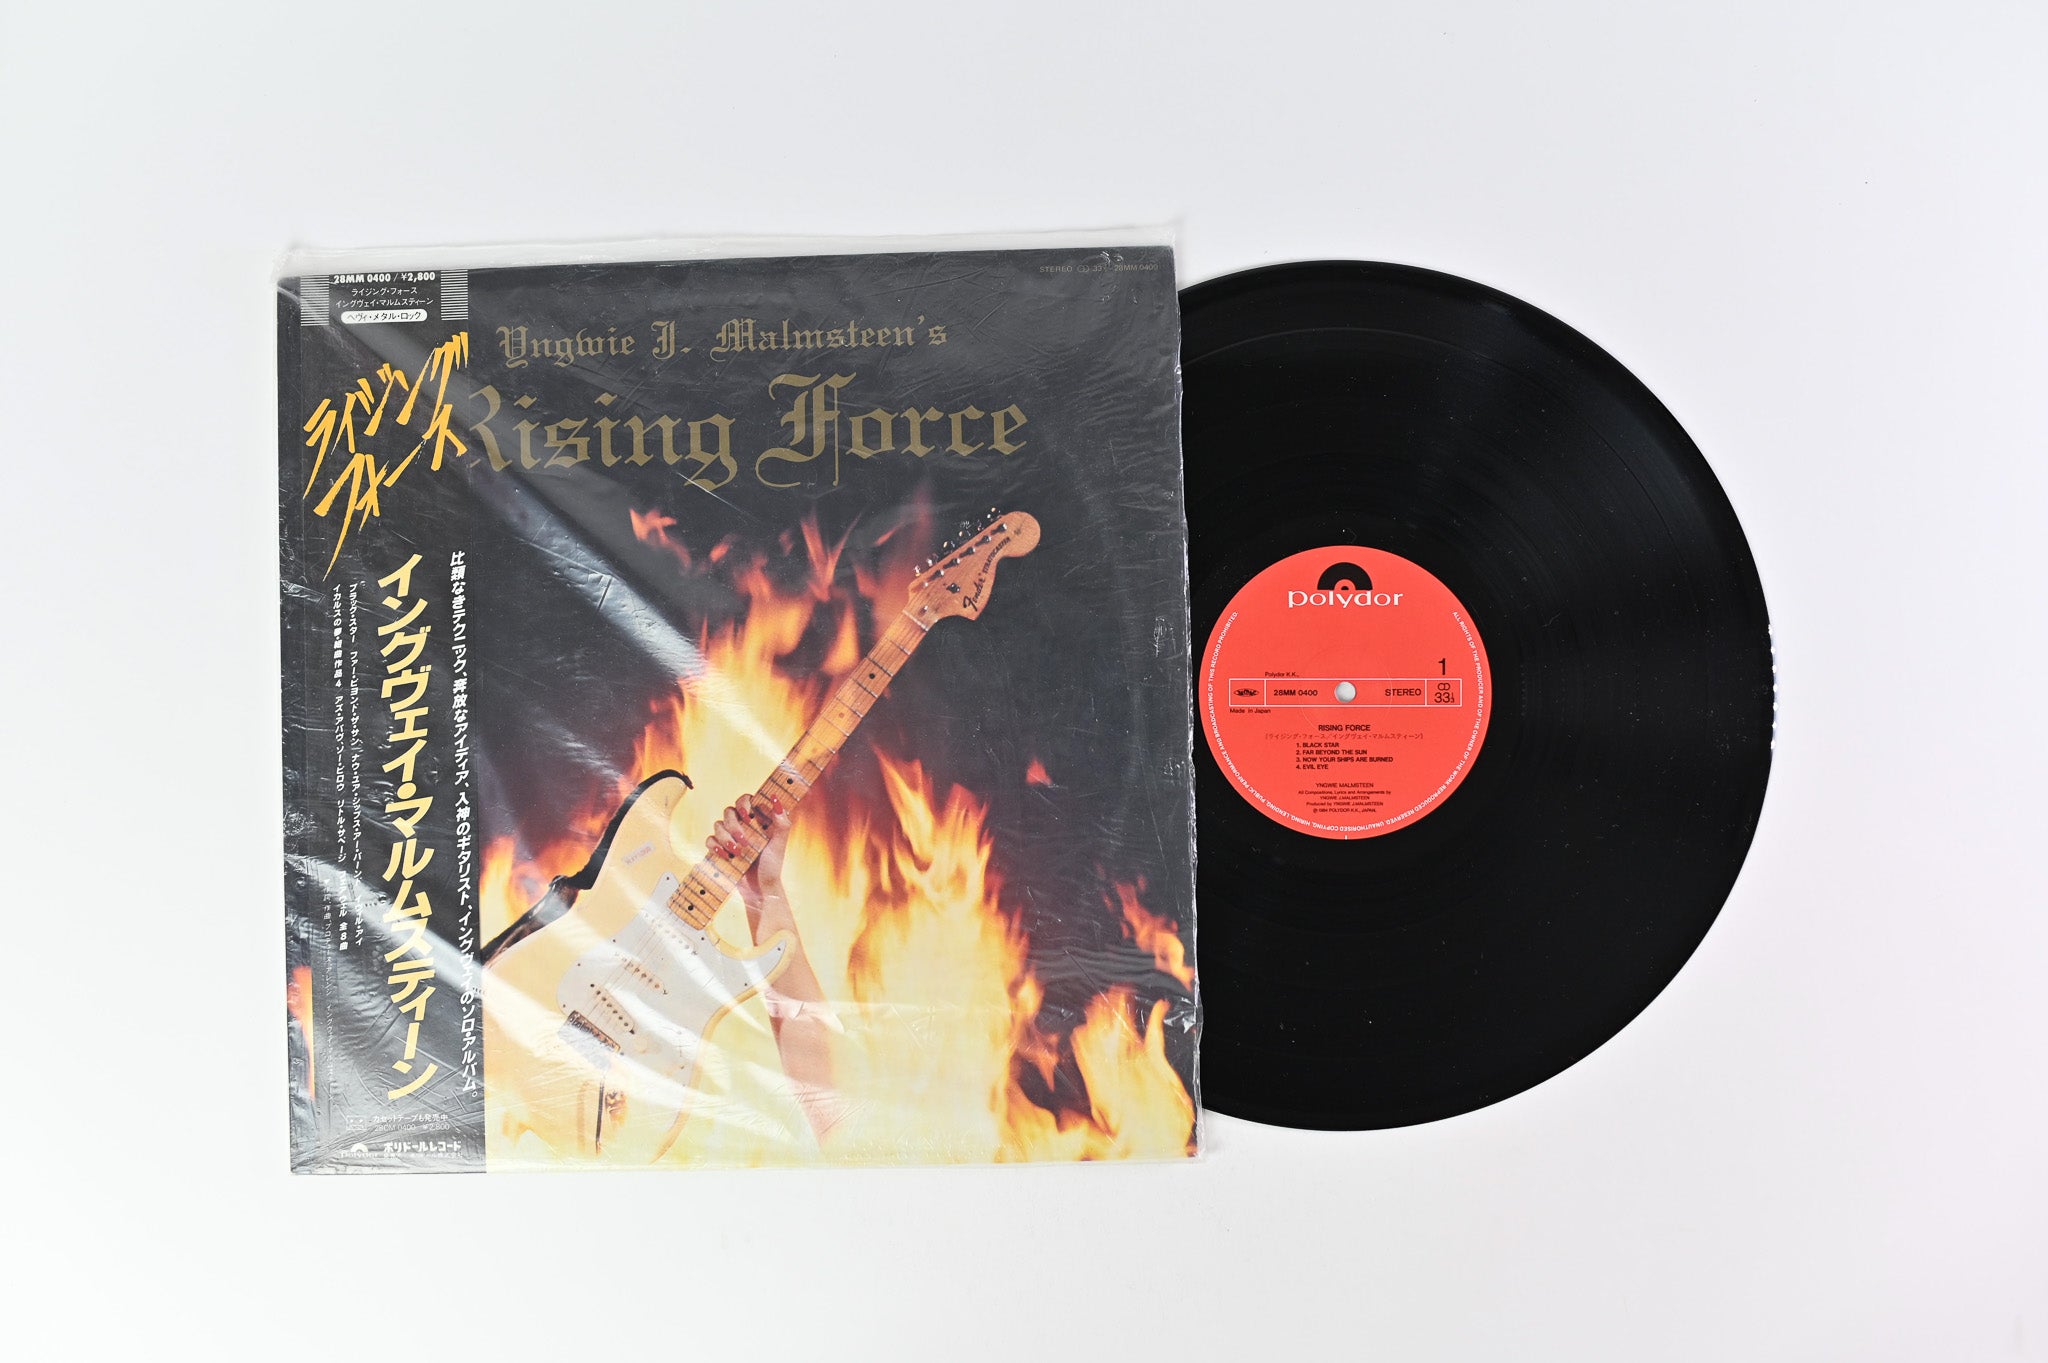 Yngwie Malmsteen - Rising Force on Polydor Japanese Pressing